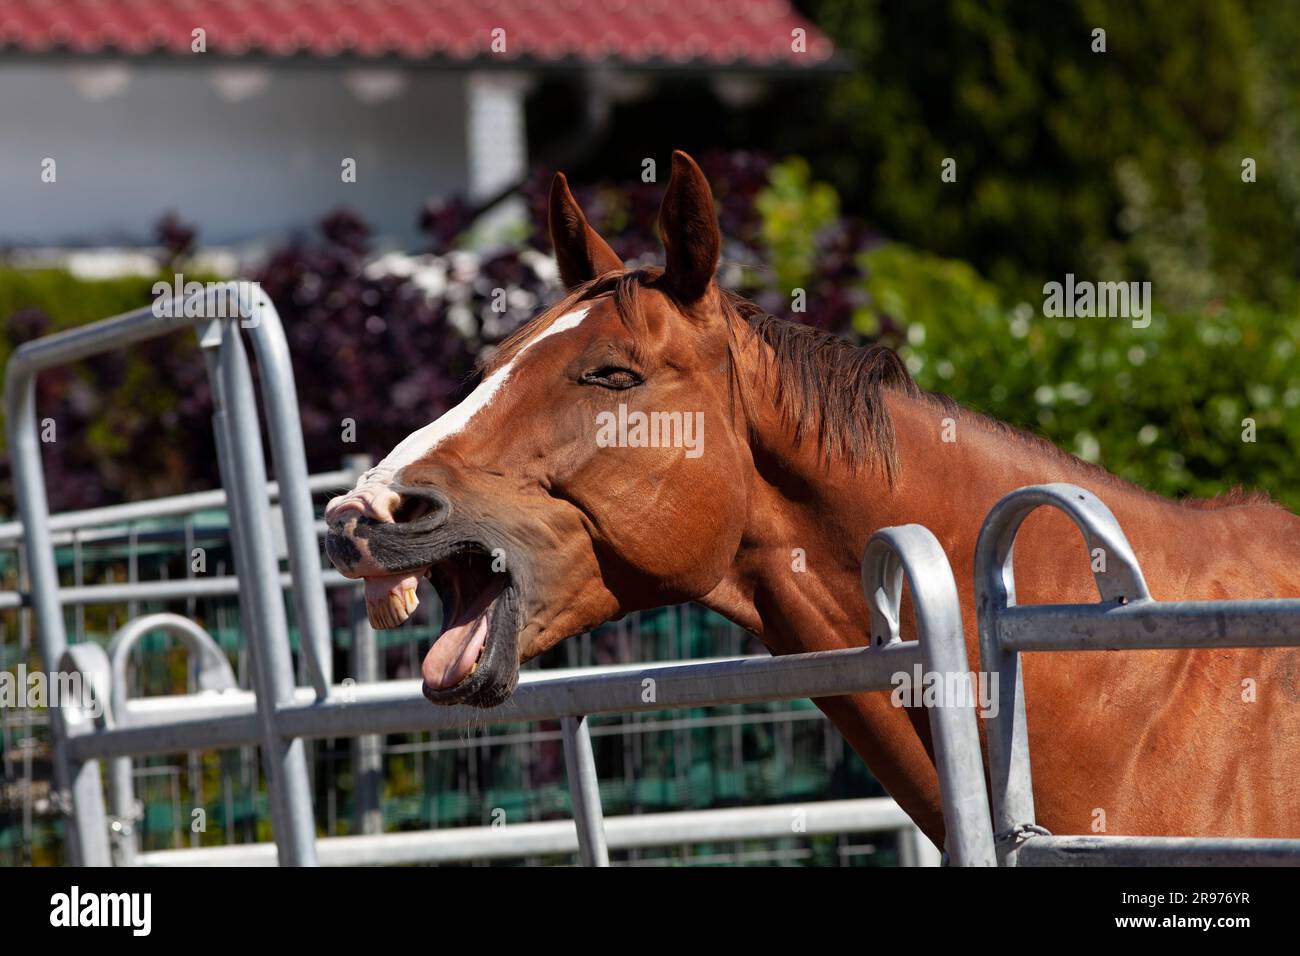 Funny horse yawn and smile Stock Photo